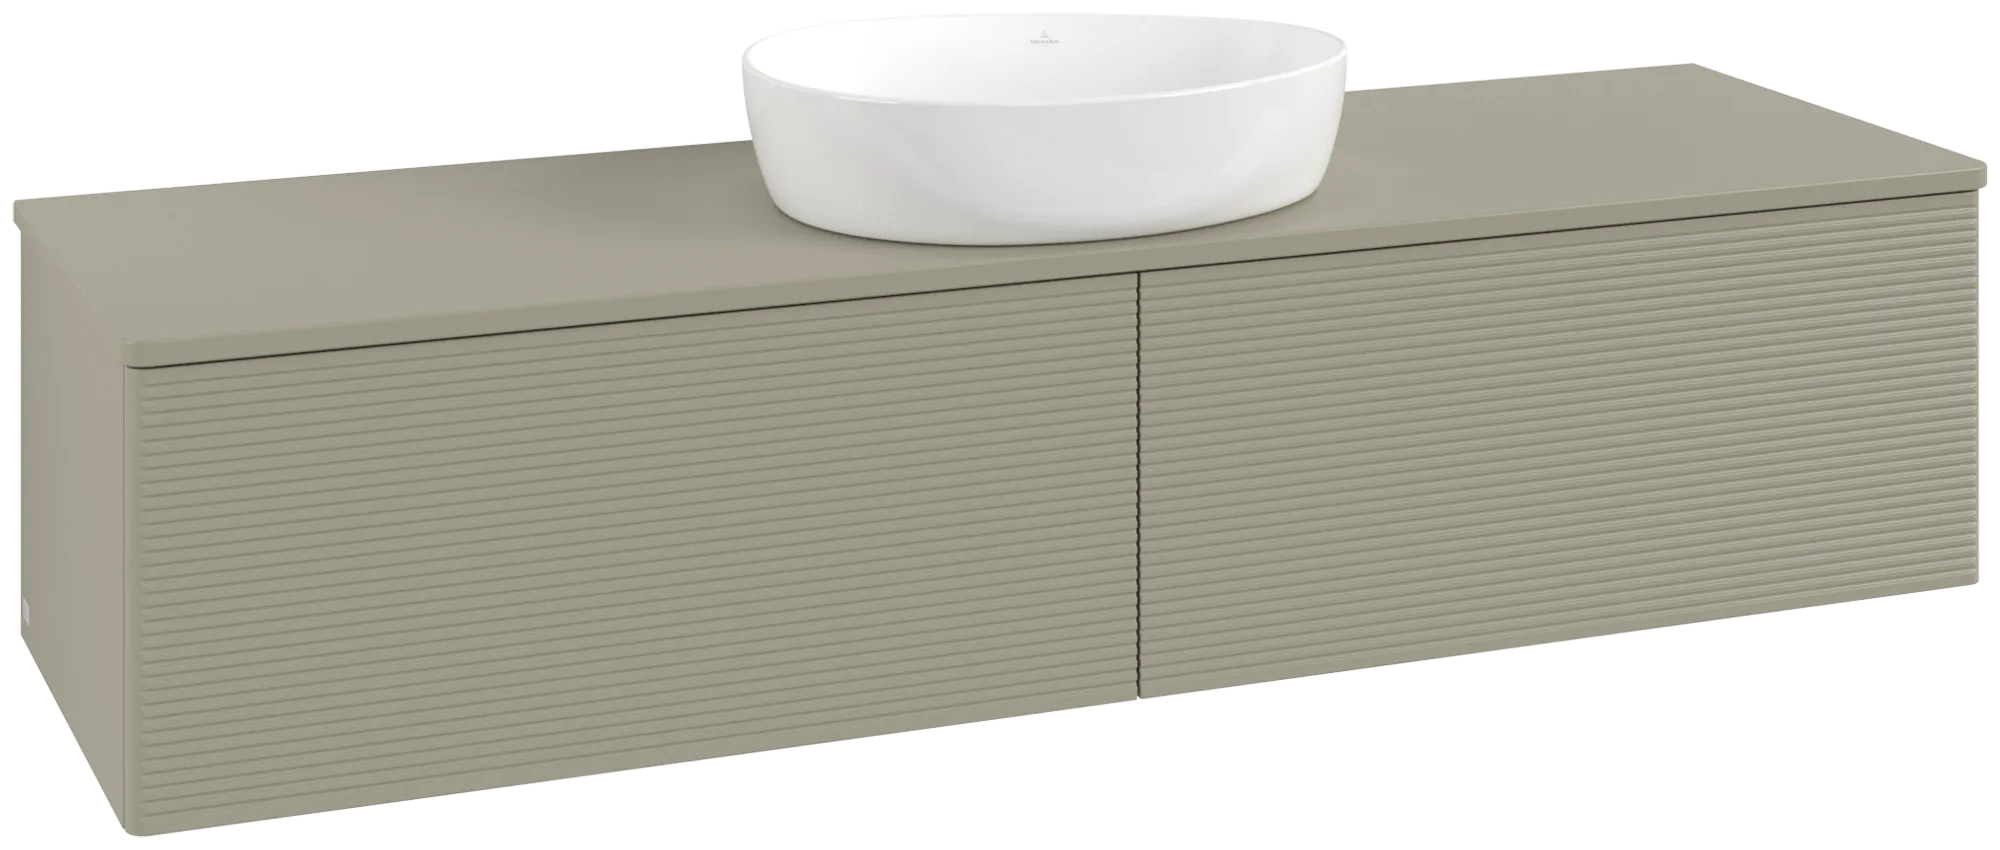 Picture of VILLEROY BOCH Antao Vanity unit, with lighting, 2 pull-out compartments, 1600 x 360 x 500 mm, Front with grain texture, Stone Grey Matt Lacquer / Stone Grey Matt Lacquer #L36110HK